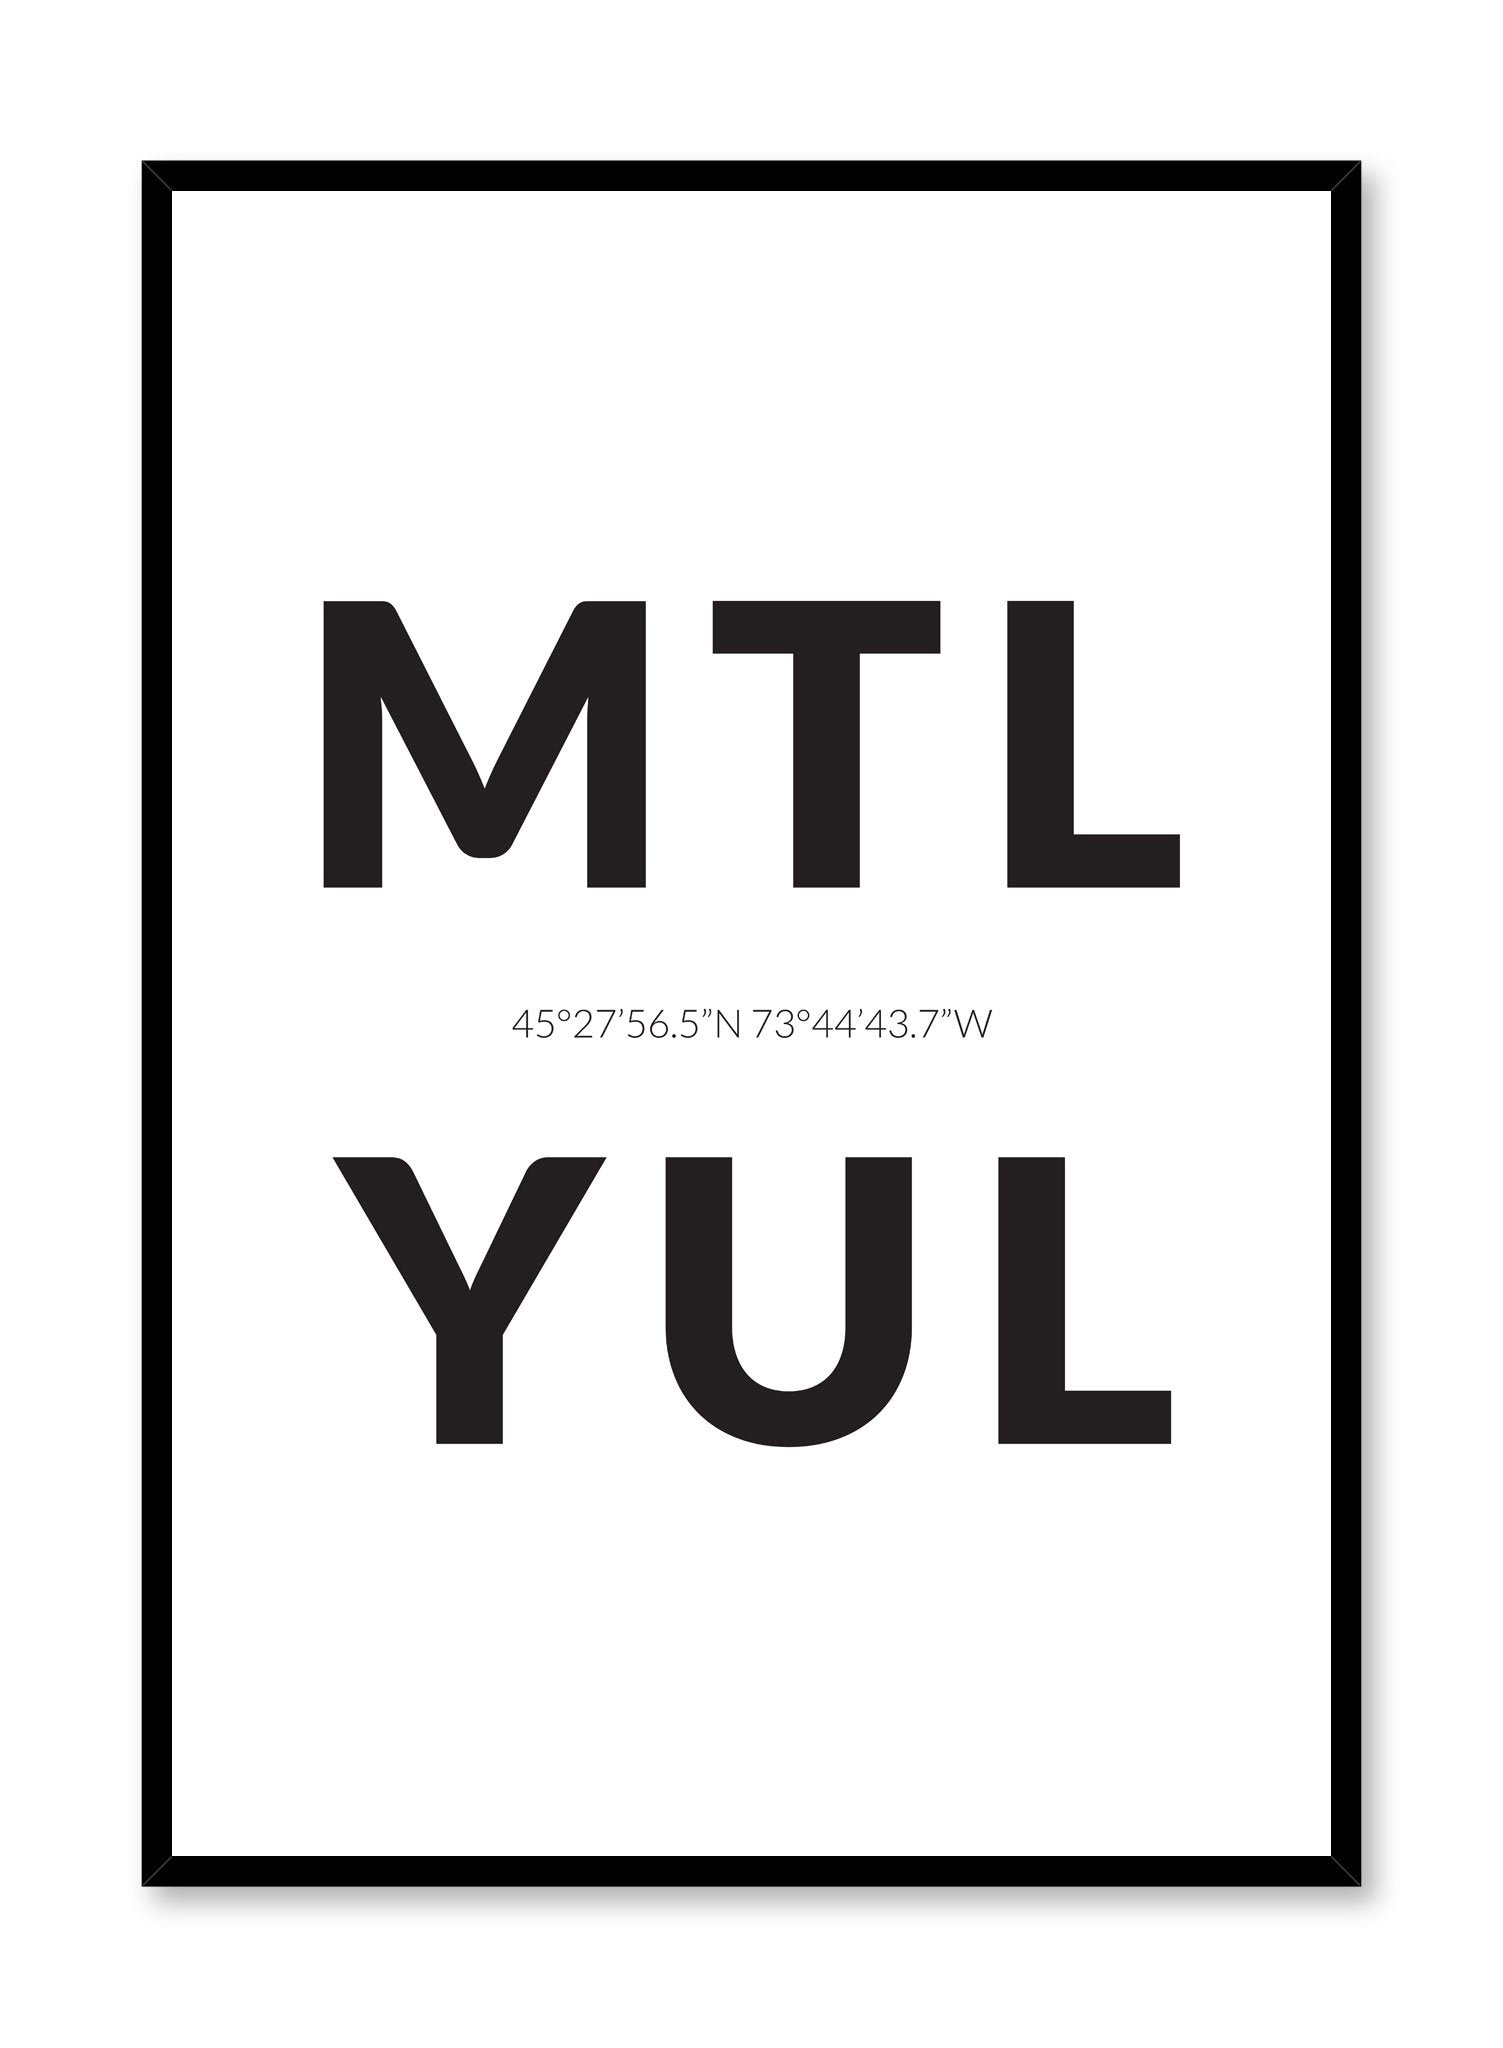 Minimalist design poster by Opposite Wall with airport code MTL YUL